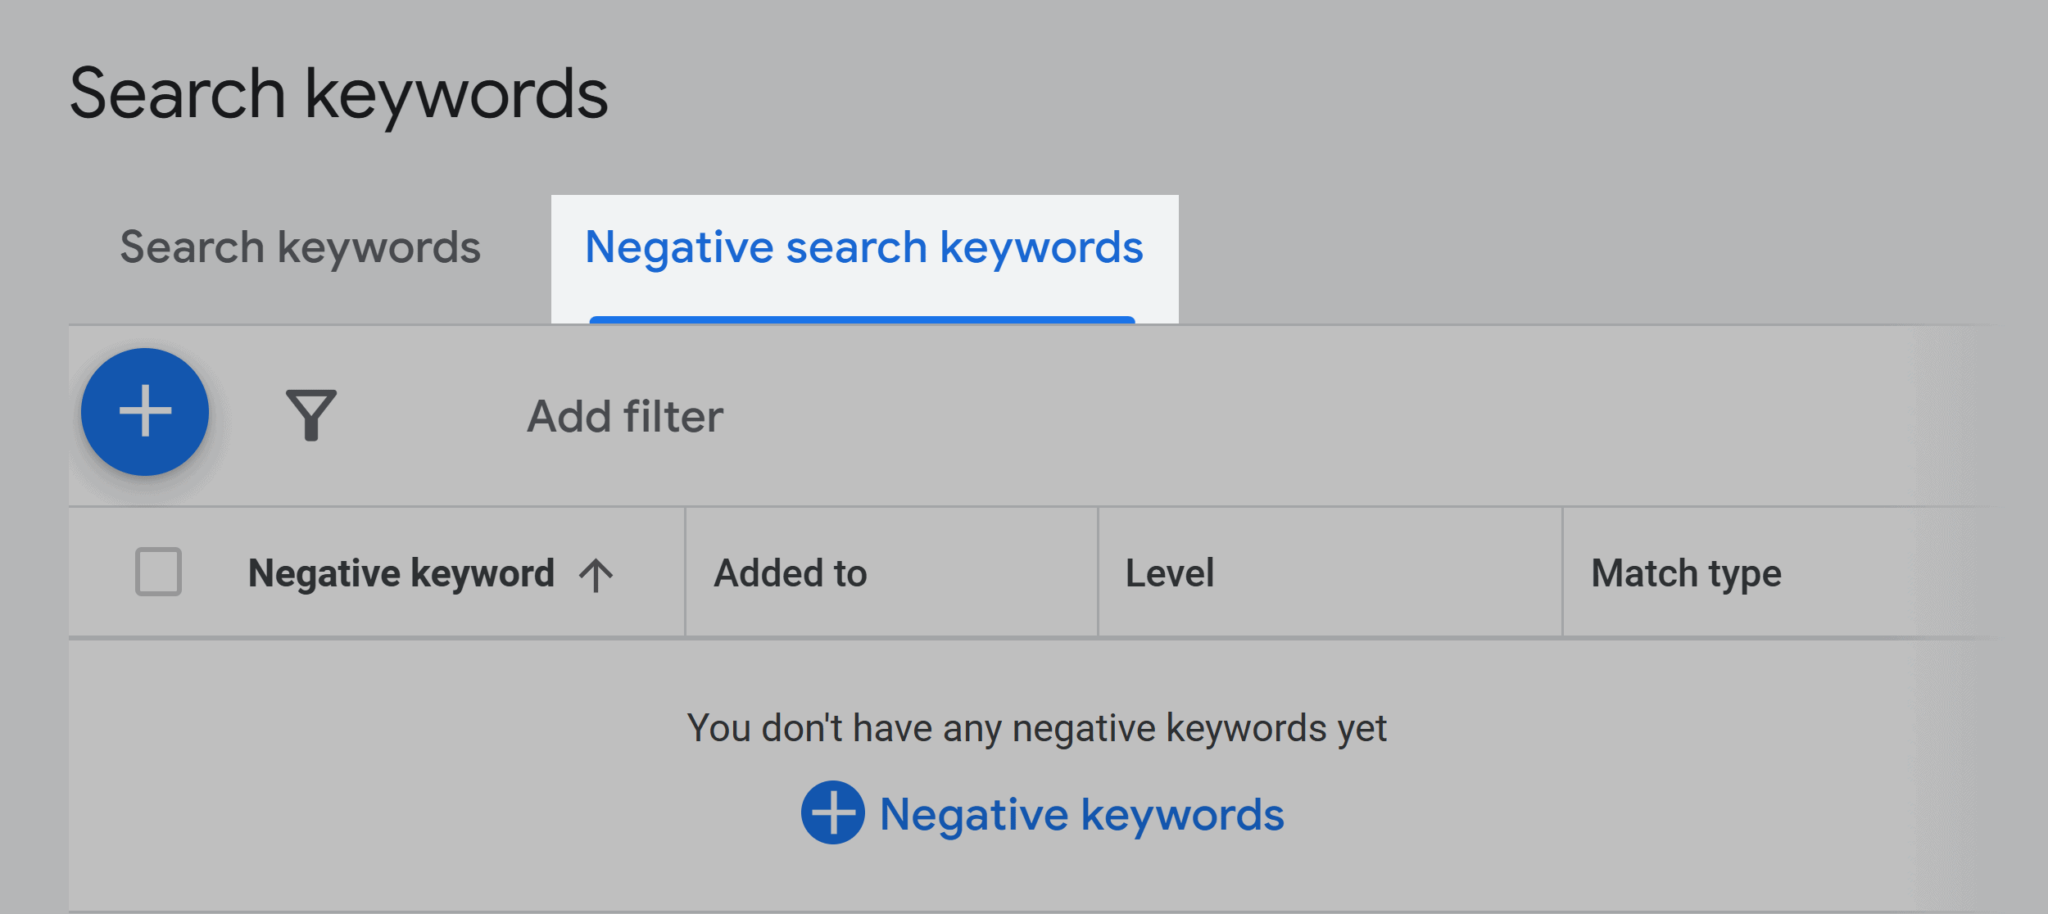 search-keywords-negative-search-keywords How to Use Keyword Match Types in Google Ads